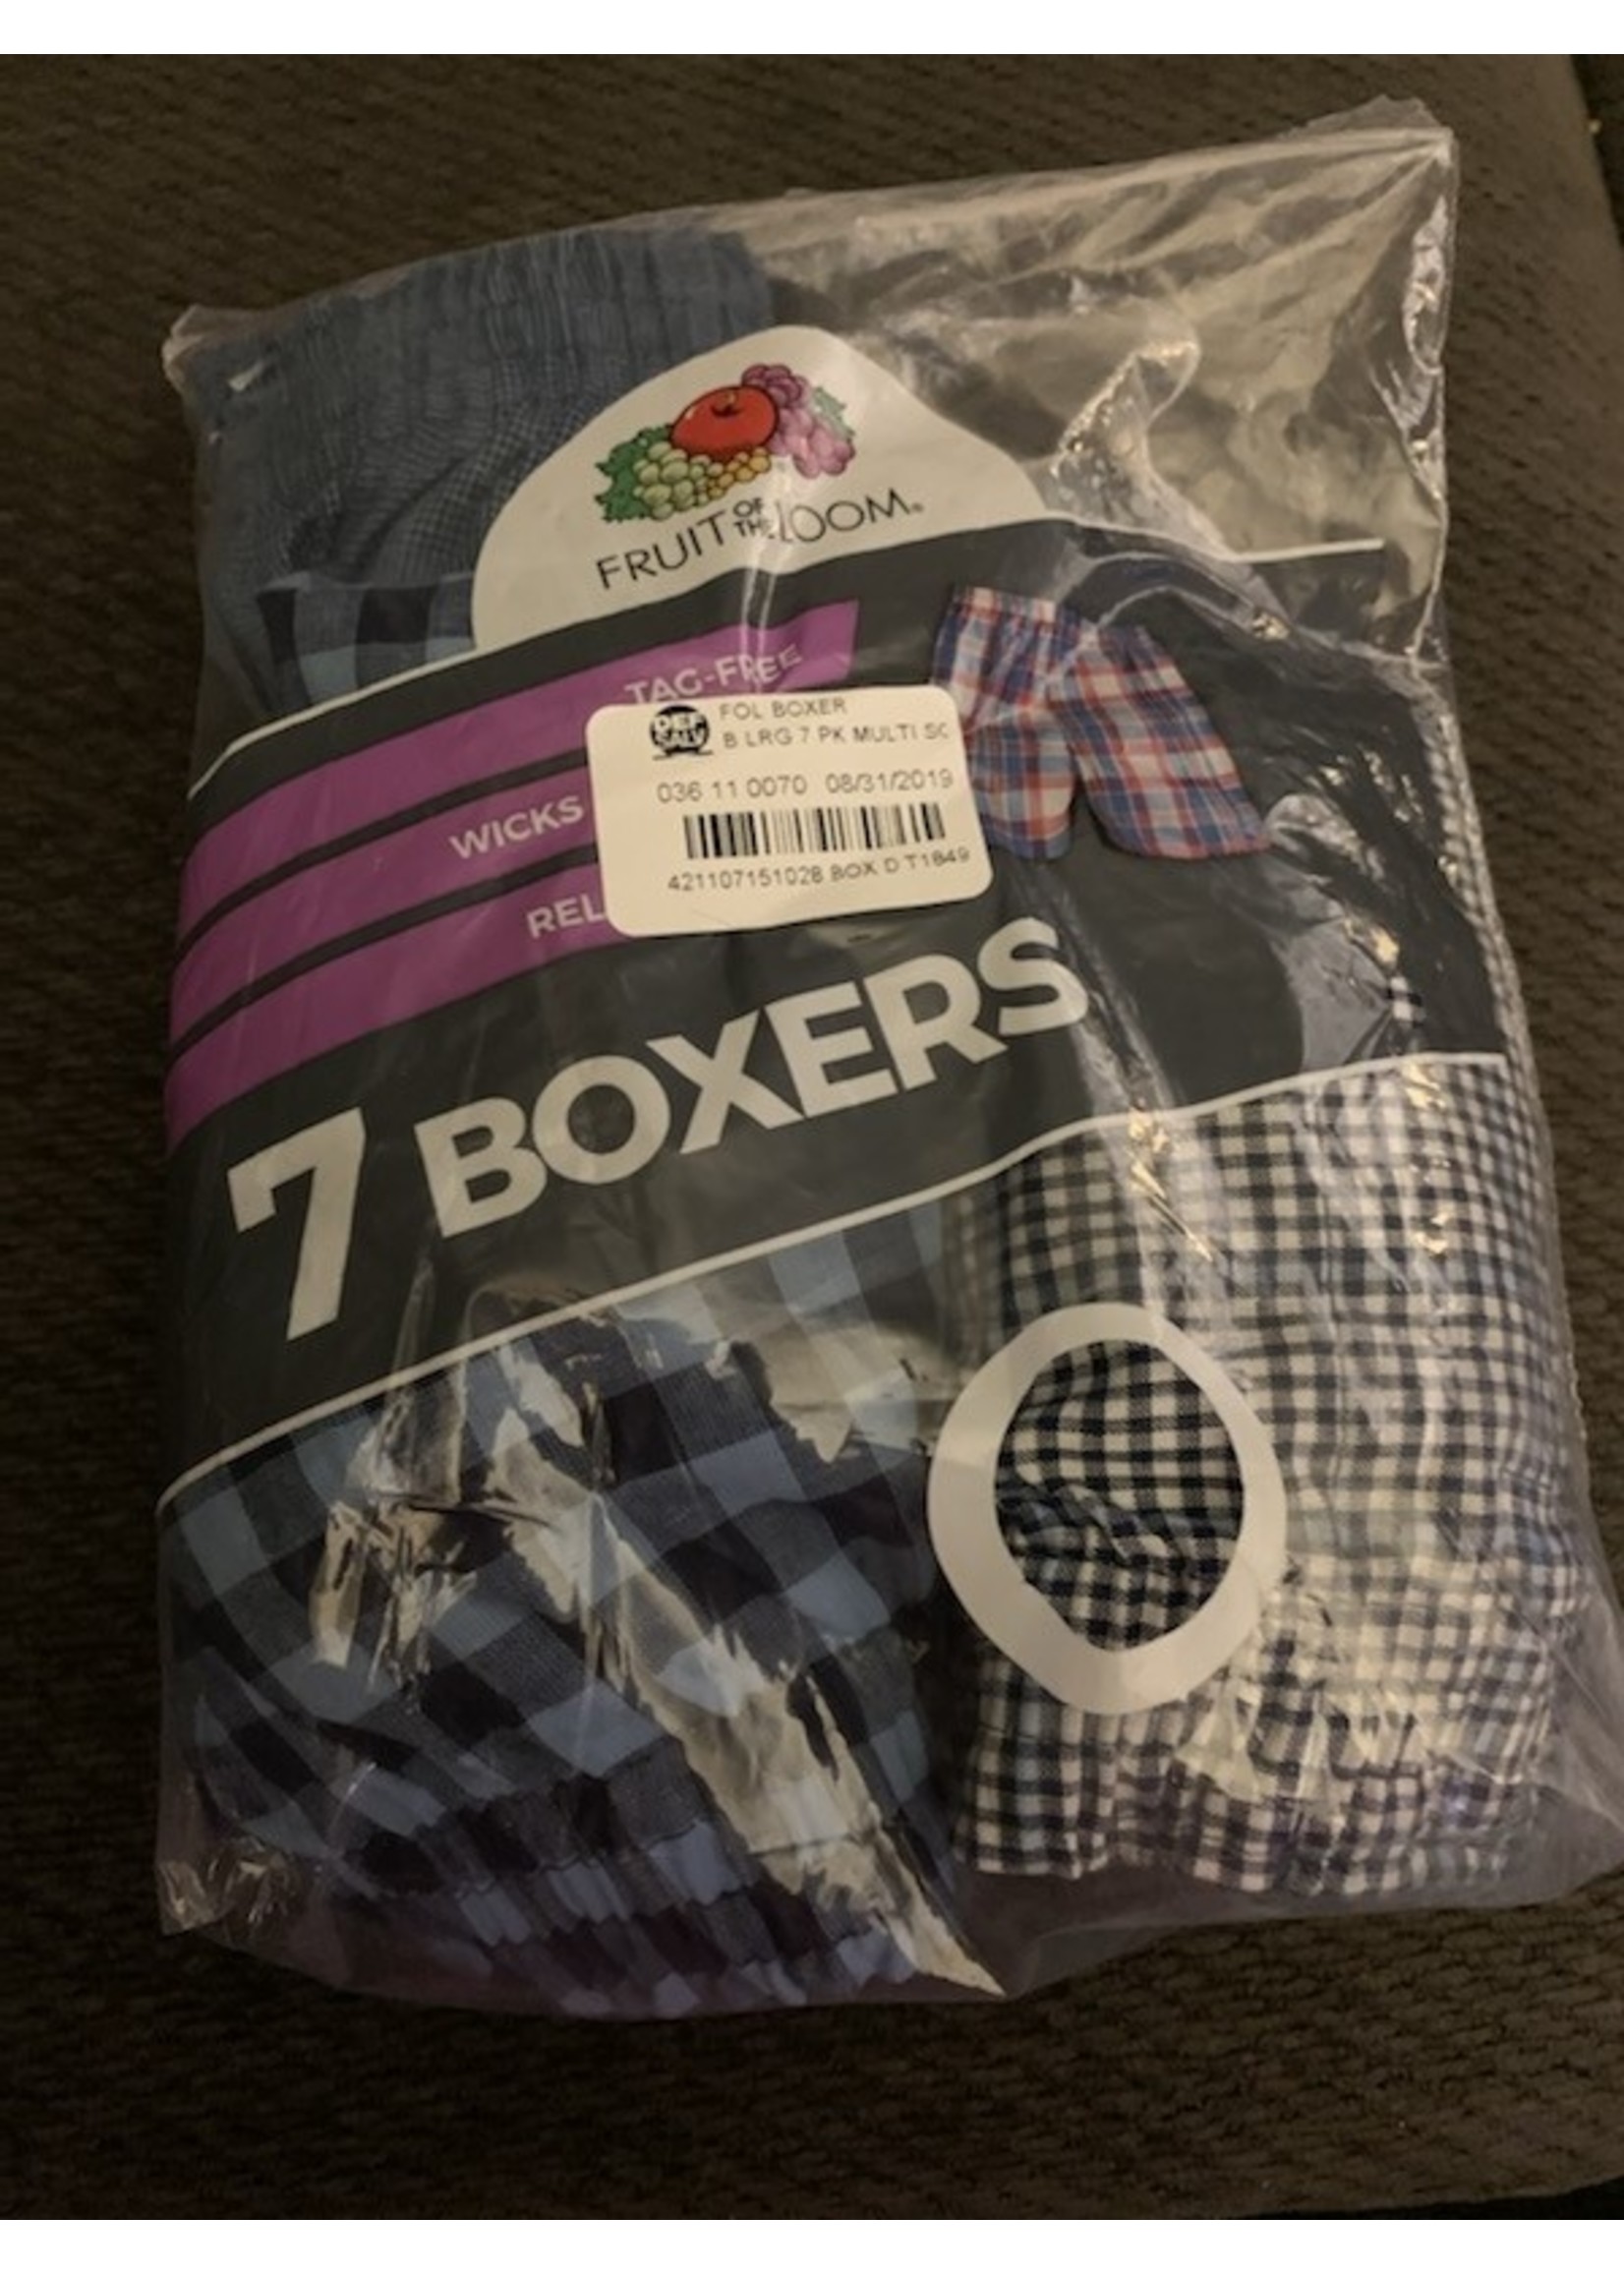 Fruit of the Loom Fruit of the Loom Boys Boxers 3 Pair Size Large 14-16